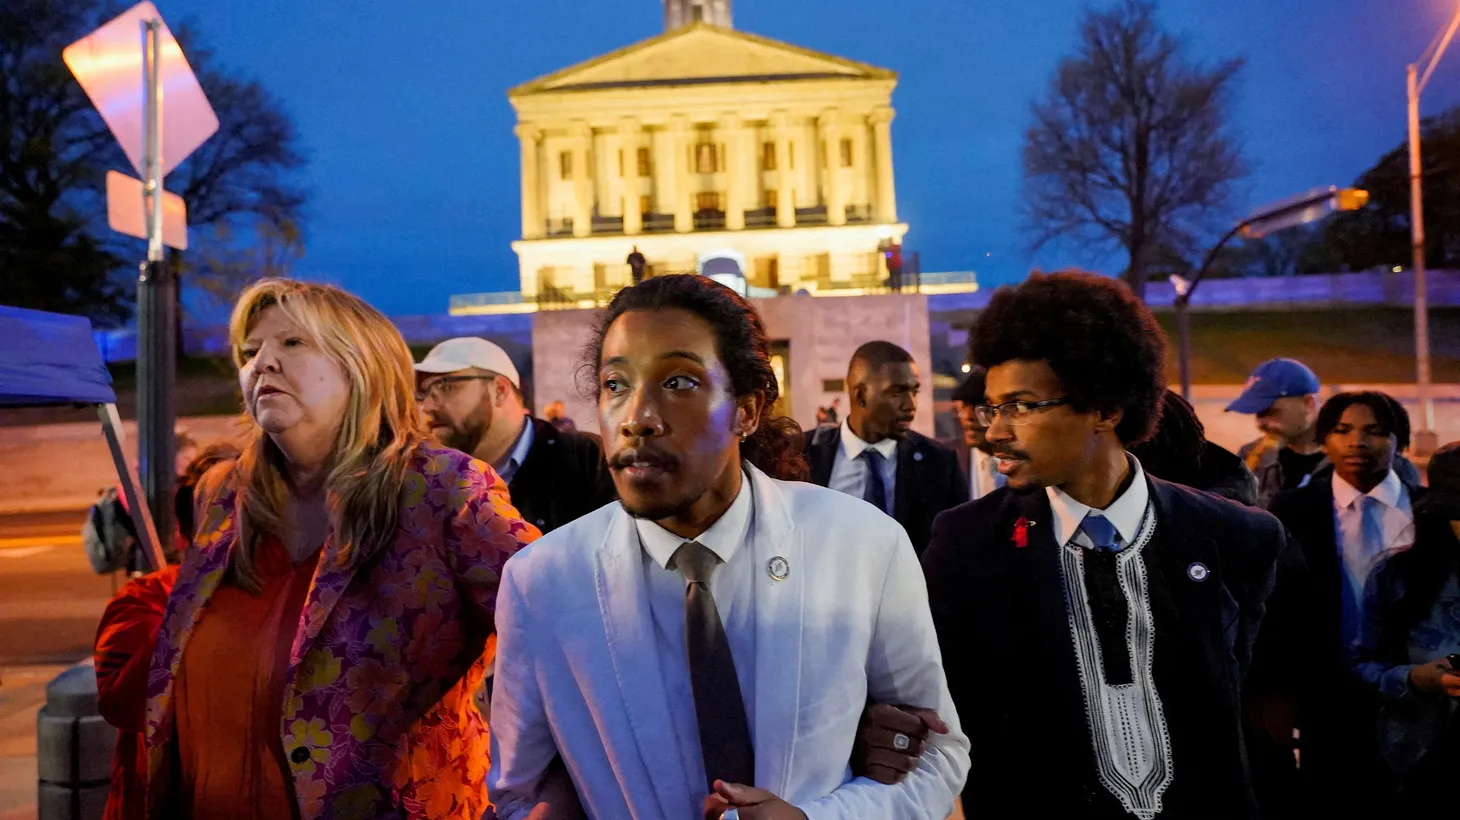 Rep. Justin Pearson, Rep. Justin Jones, and Rep. Gloria Johnson leave the Tennessee State Capitol after a vote at the Tennessee House of Representatives to expel two Democratic members for their roles in a gun control demonstration at the statehouse last week, in Nashville,Tennessee, U.S., April 6, 2023.